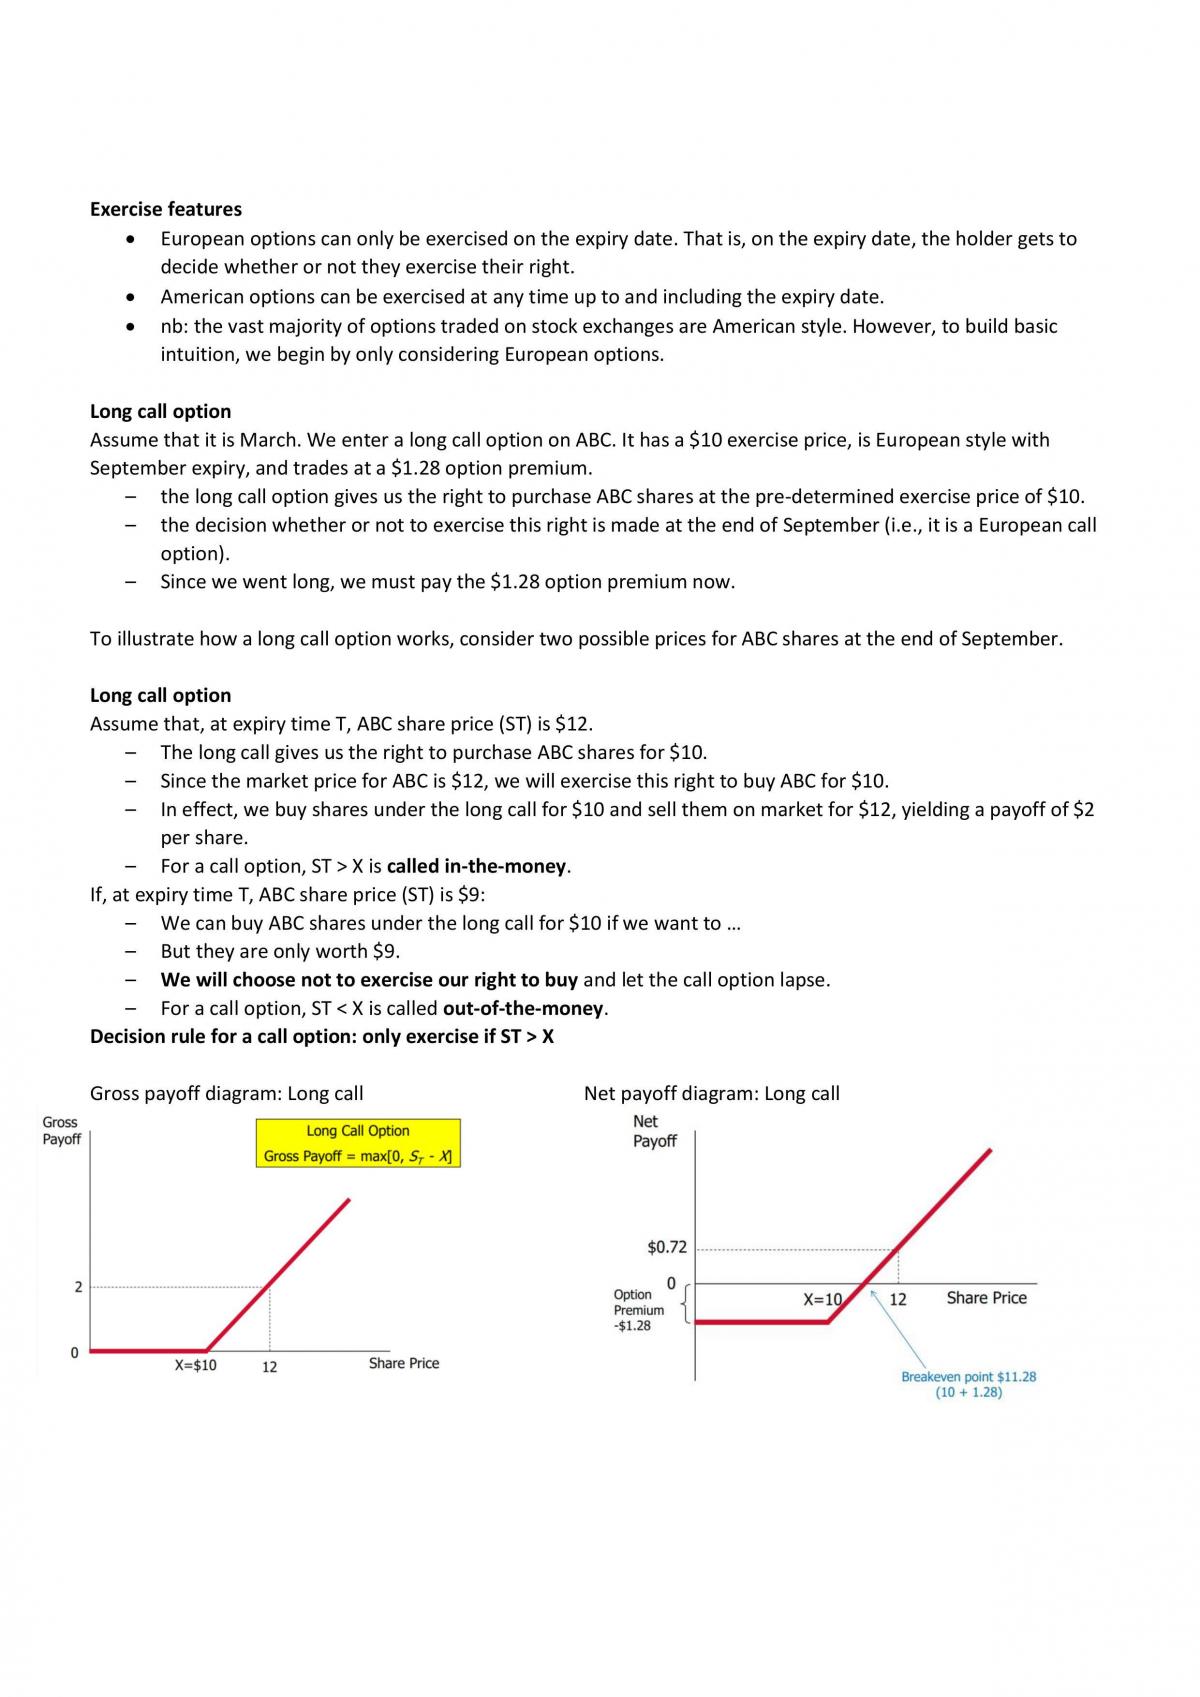 BFF2751 Derivatives Exam Notes - Page 2